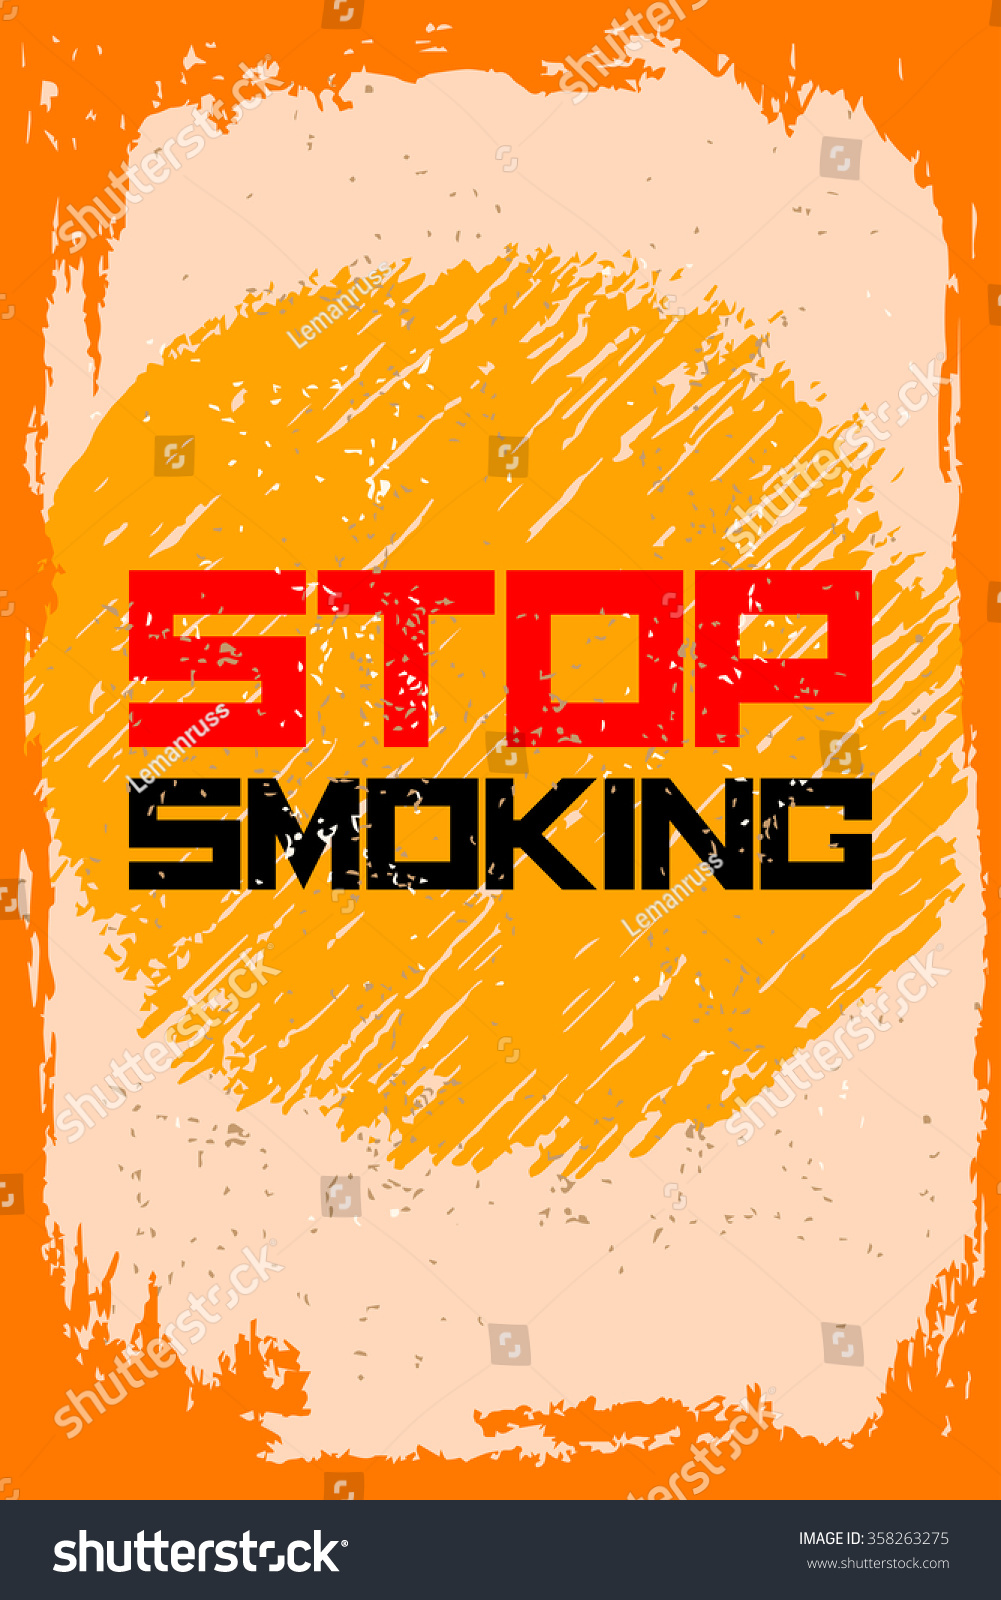 Stop smoking. Creative motivation background. Grunge and retro design. Inspirational motivational quote. Calligraphic And Typographic. Retro color. #358263275